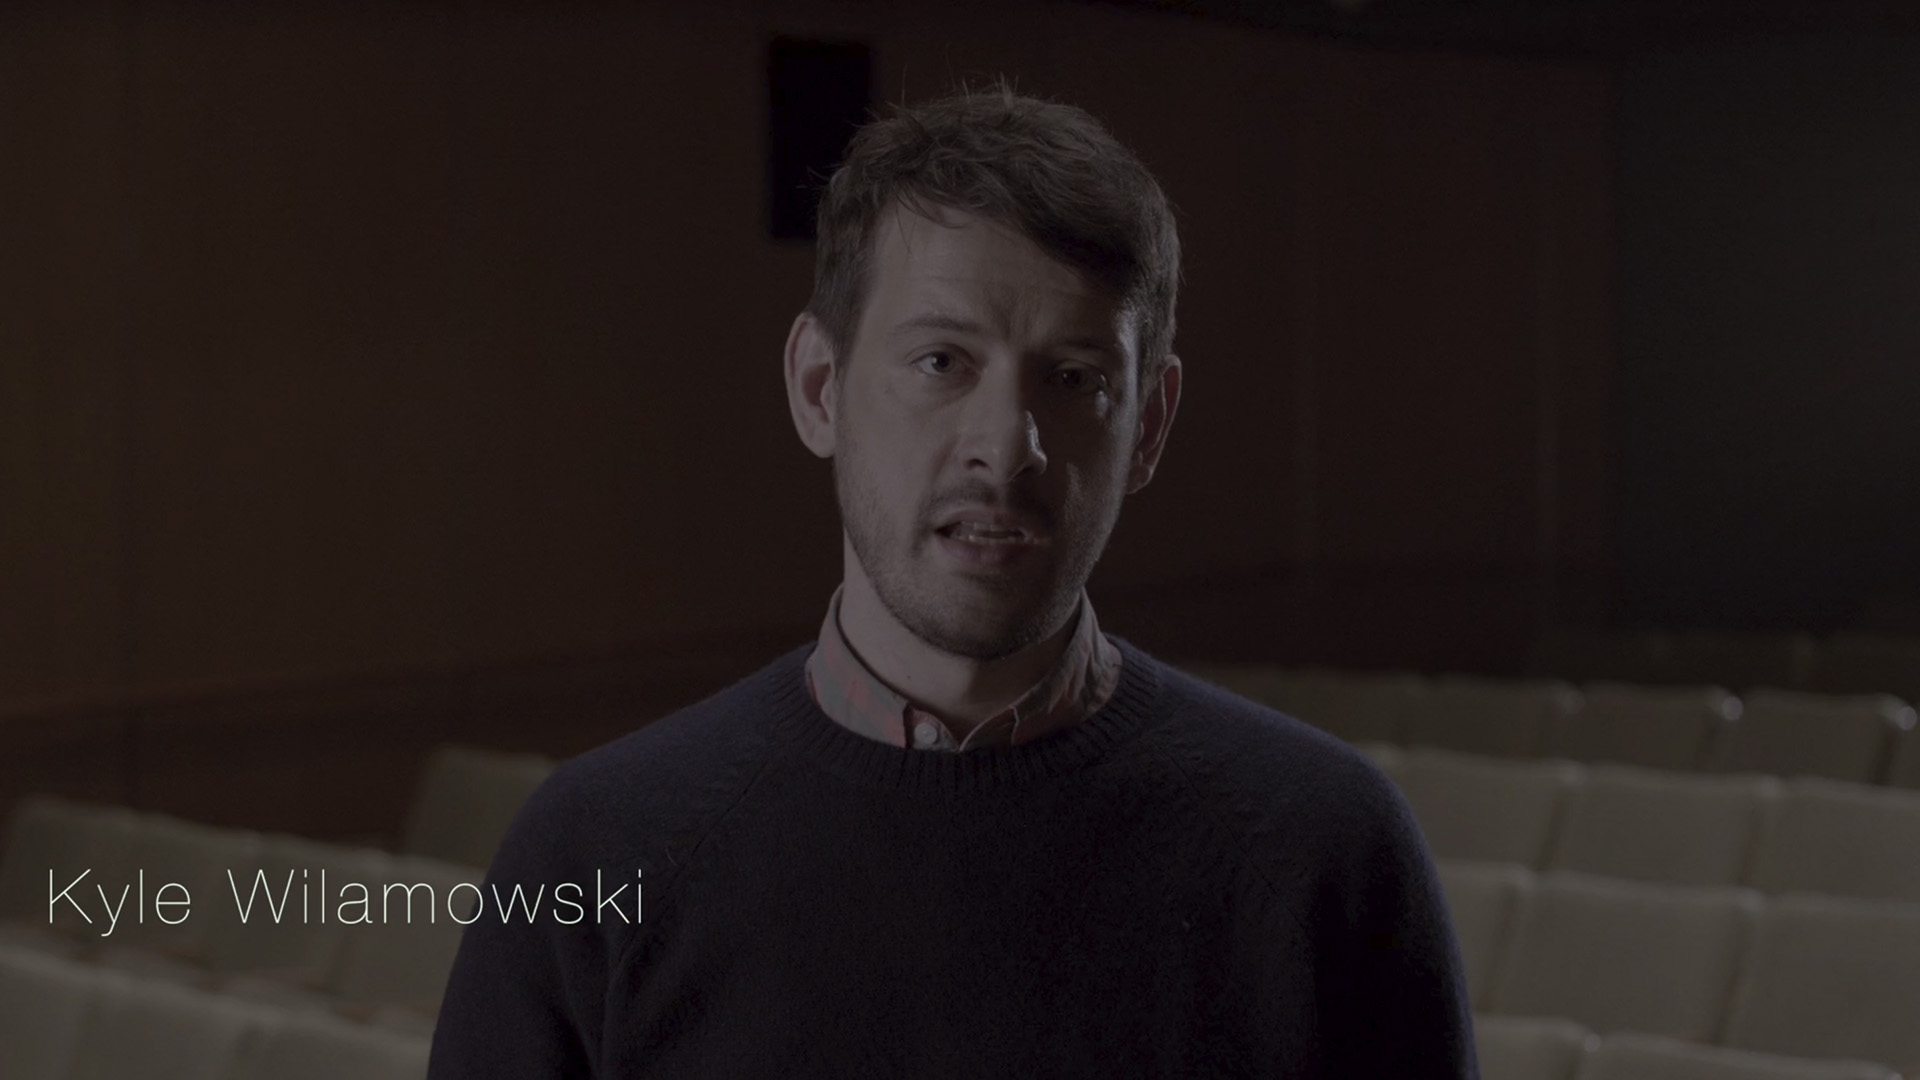 The portrait of the course teacher - Kyle Wilamowski - screenshot from the Fundamentals of Directing